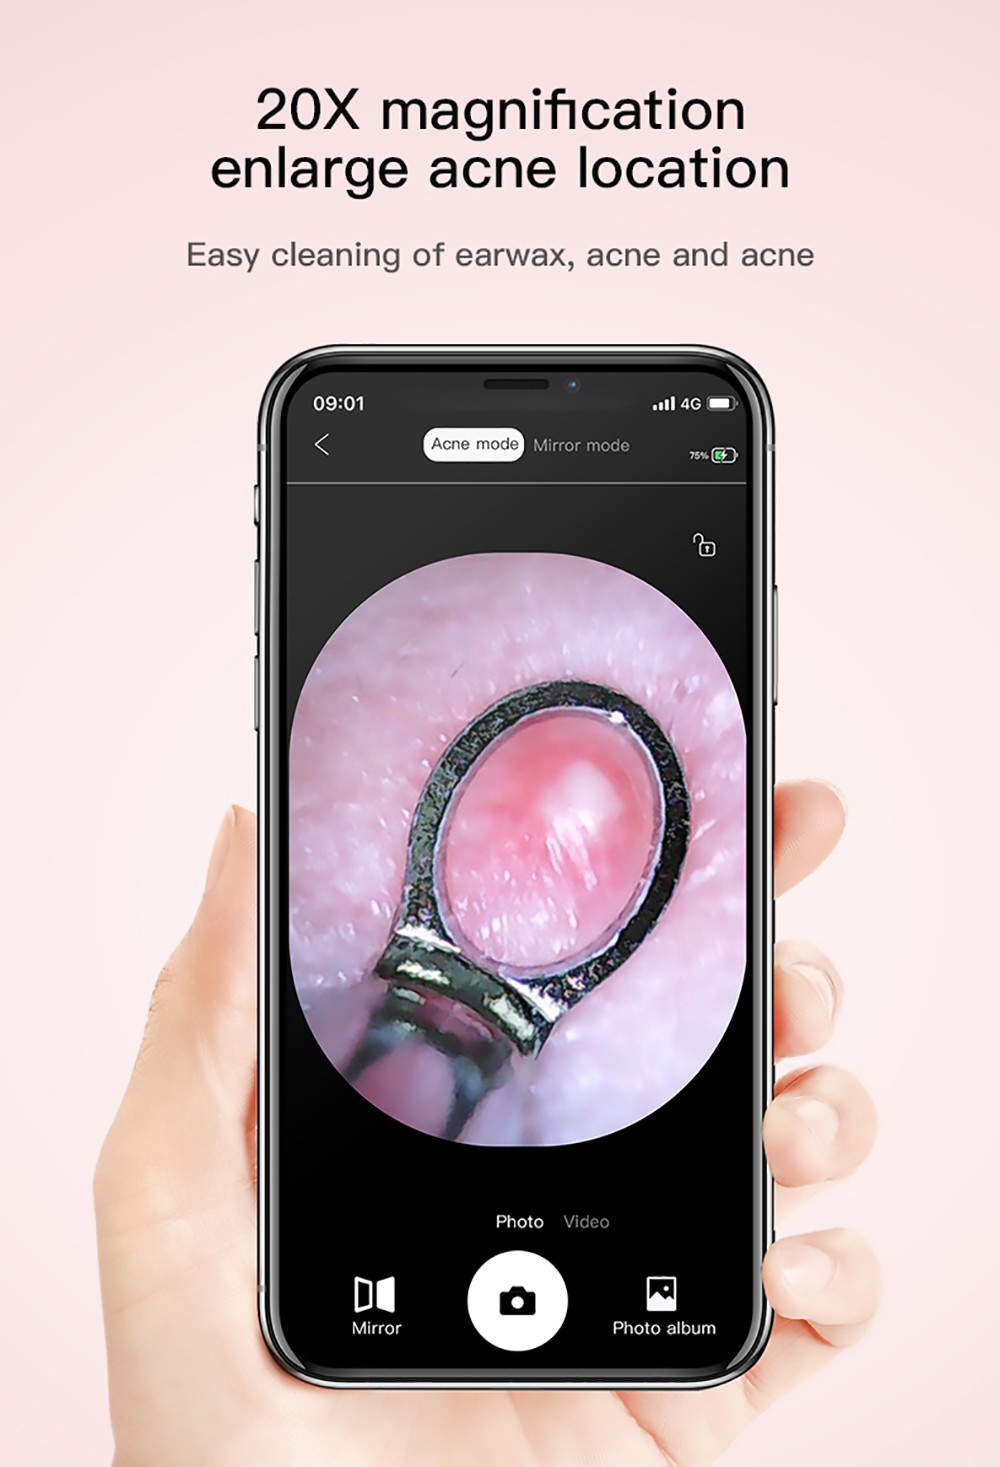 SUNUO M3 Smart Visible Acne Removal Cleaner, 500W HD Camera, 20X Magnification, WiFi Connection, IP65 Waterproof - White